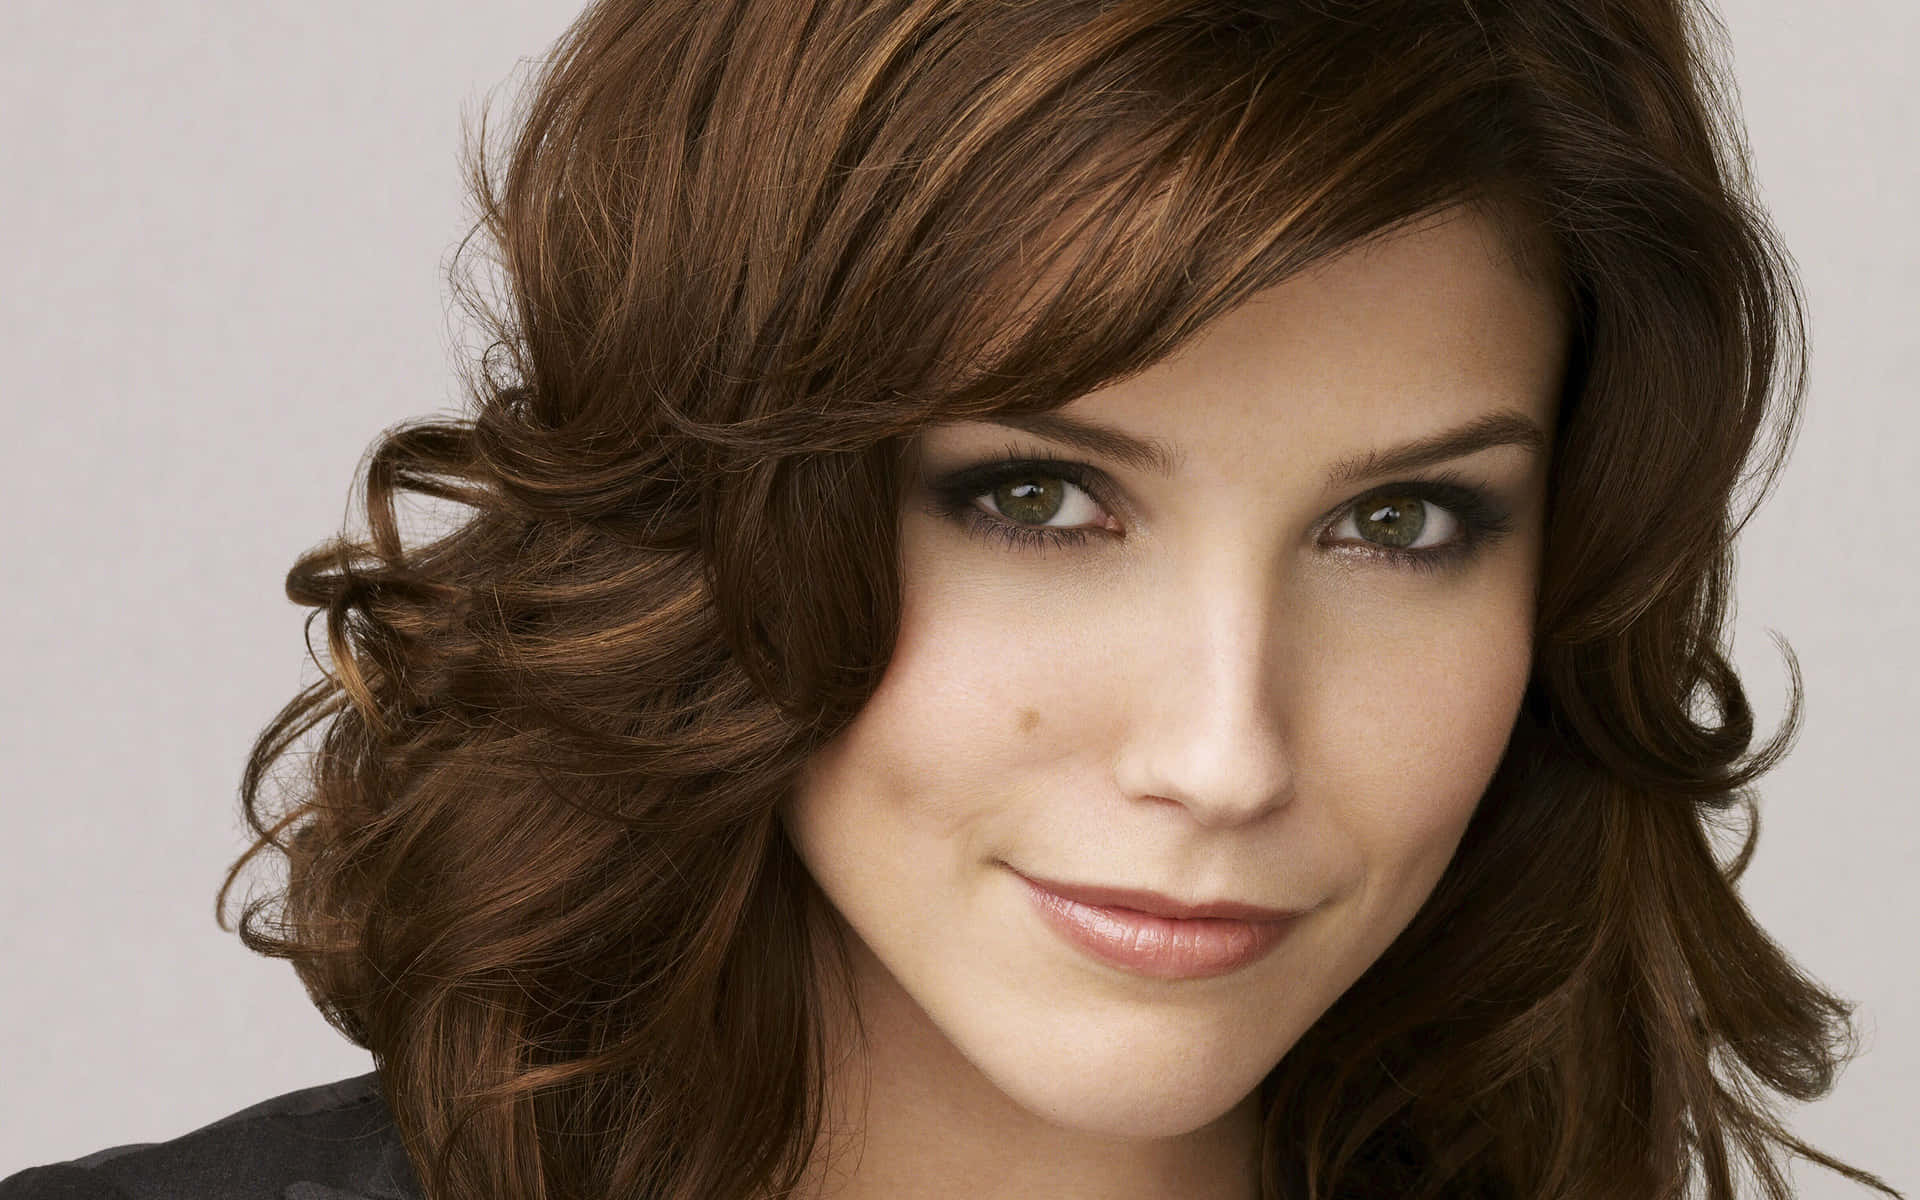 Sophia Bush oozes strength and beauty in her latest photoshoot. Wallpaper